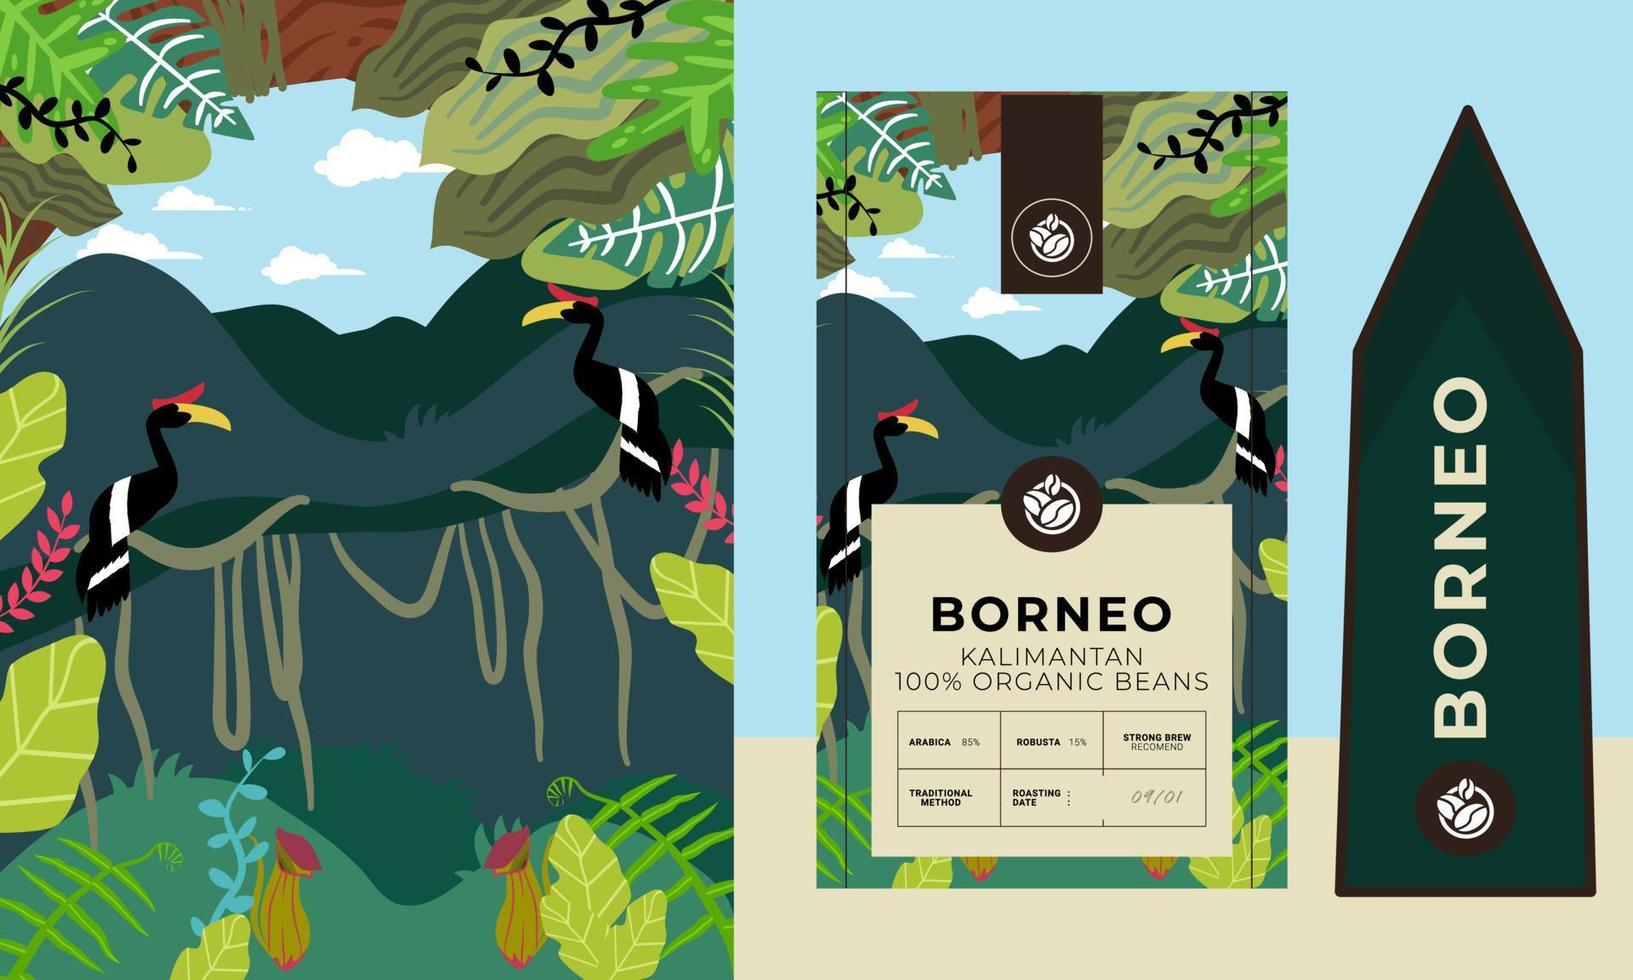 tropical rainforest with hornbill bird illustration suitable for coffee packaging design vector